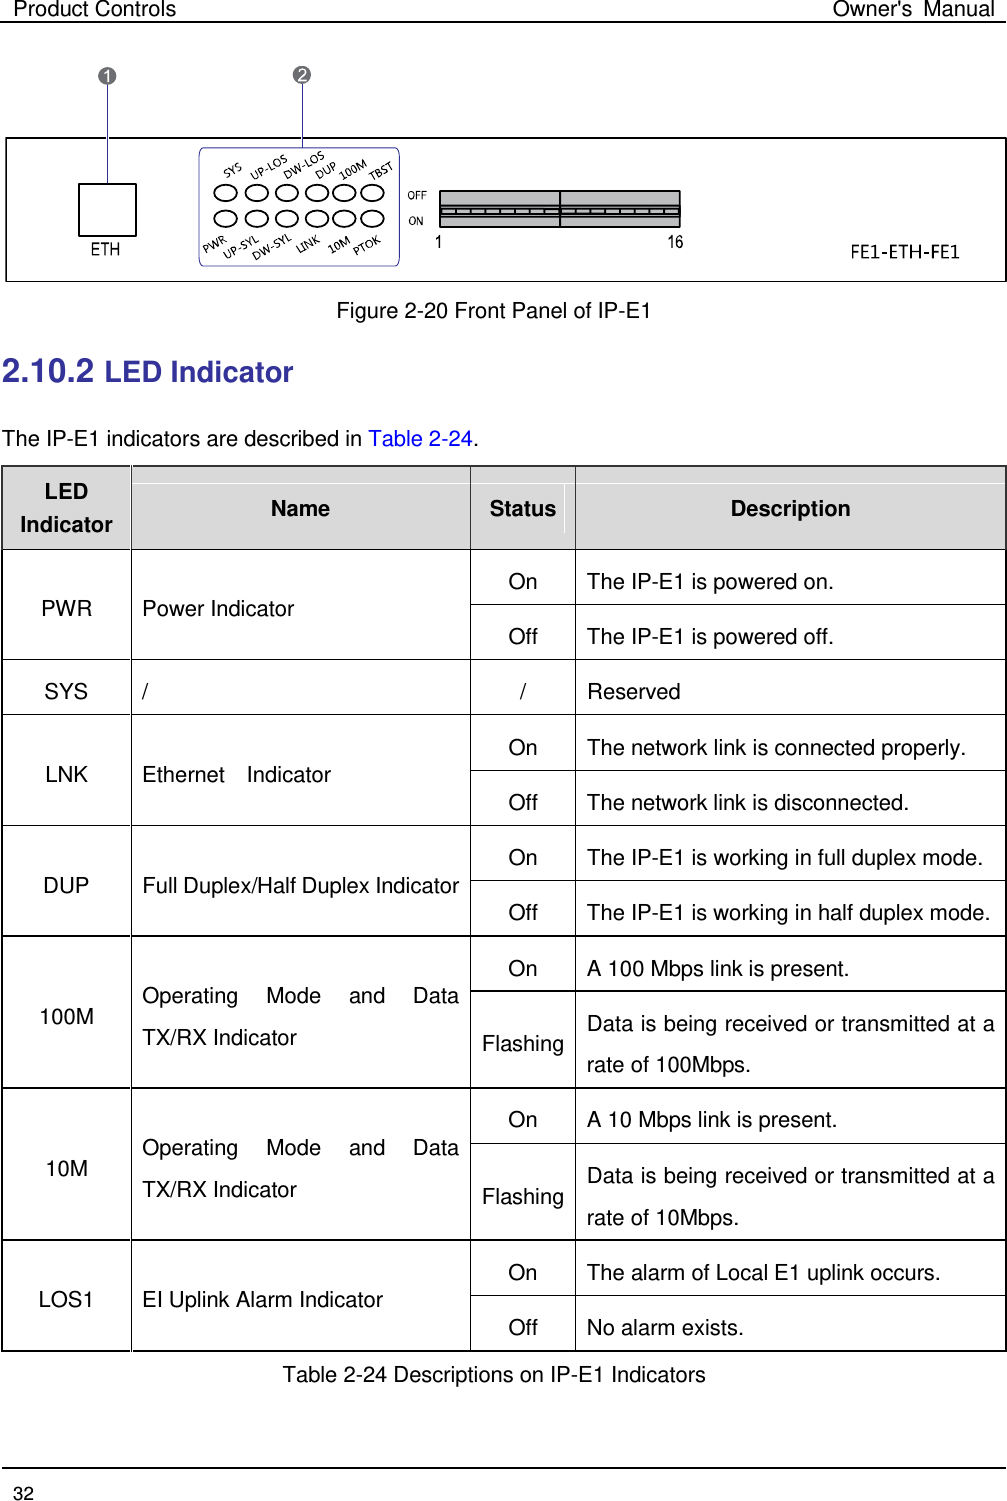 Product Controls Owner&apos;s Manual  32   Figure 2-20 Front Panel of IP-E1 2.10.2 LED Indicator The IP-E1 indicators are described in Table 2-24. LED Indicator Name   Status Description   PWR Power Indicator On   The IP-E1 is powered on.   Off The IP-E1 is powered off.   SYS  /  /  Reserved   LNK Ethernet  Indicator On   The network link is connected properly. Off The network link is disconnected.   DUP Full Duplex/Half Duplex Indicator On   The IP-E1 is working in full duplex mode.   Off The IP-E1 is working in half duplex mode. 100M Operating Mode and Data TX/RX Indicator On   A 100 Mbps link is present. Flashing Data is being received or transmitted at a rate of 100Mbps. 10M Operating Mode and Data TX/RX Indicator On   A 10 Mbps link is present. Flashing Data is being received or transmitted at a rate of 10Mbps. LOS1 EI Uplink Alarm Indicator On   The alarm of Local E1 uplink occurs.   Off No alarm exists. Table 2-24 Descriptions on IP-E1 Indicators 